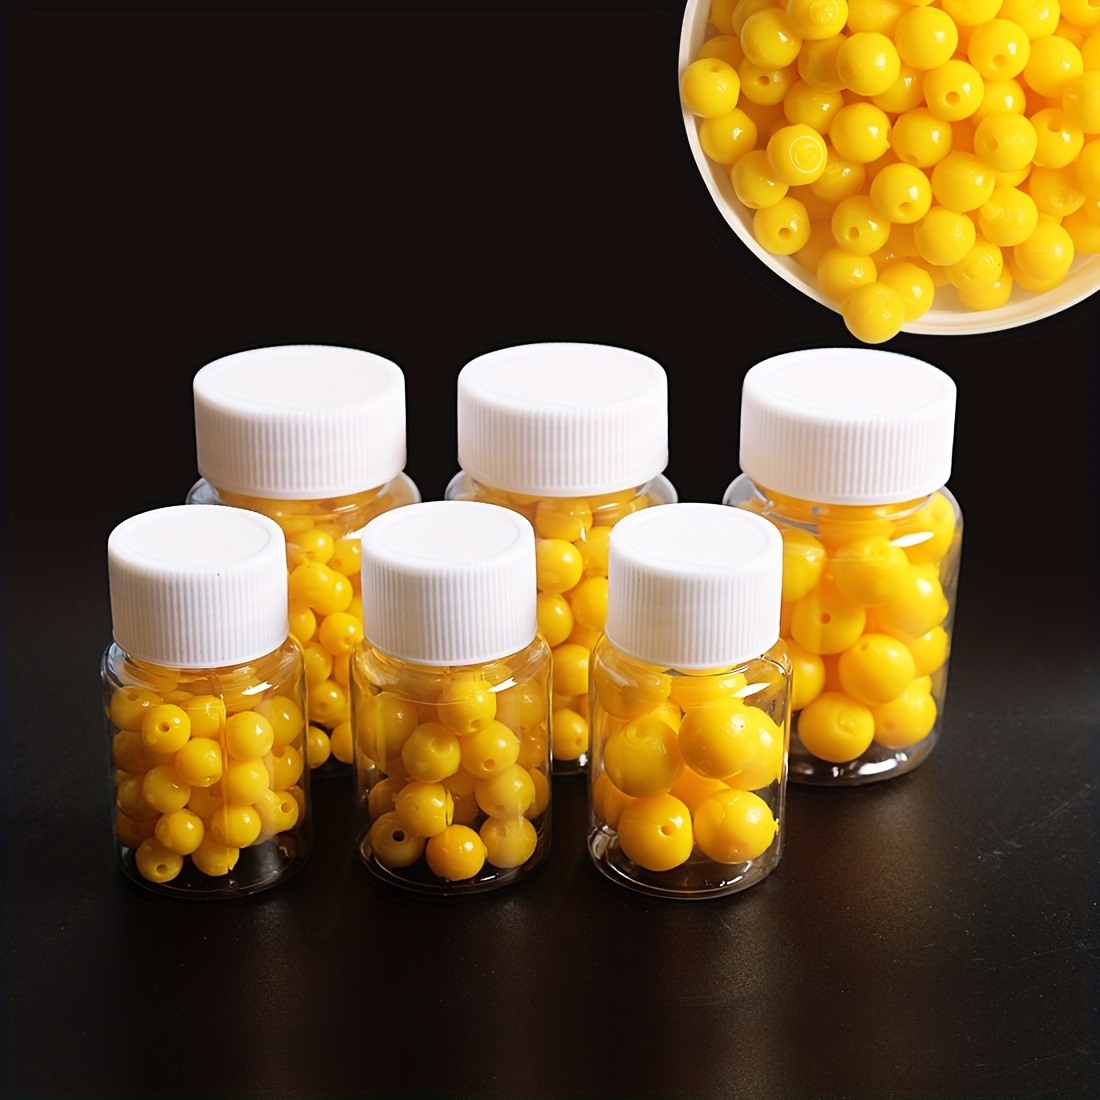 

Wild Fishing Floating Pellets - Corn Flavor Water Beads Balls For Bluefish, Carp, And Crucian - Large Fishing Lure